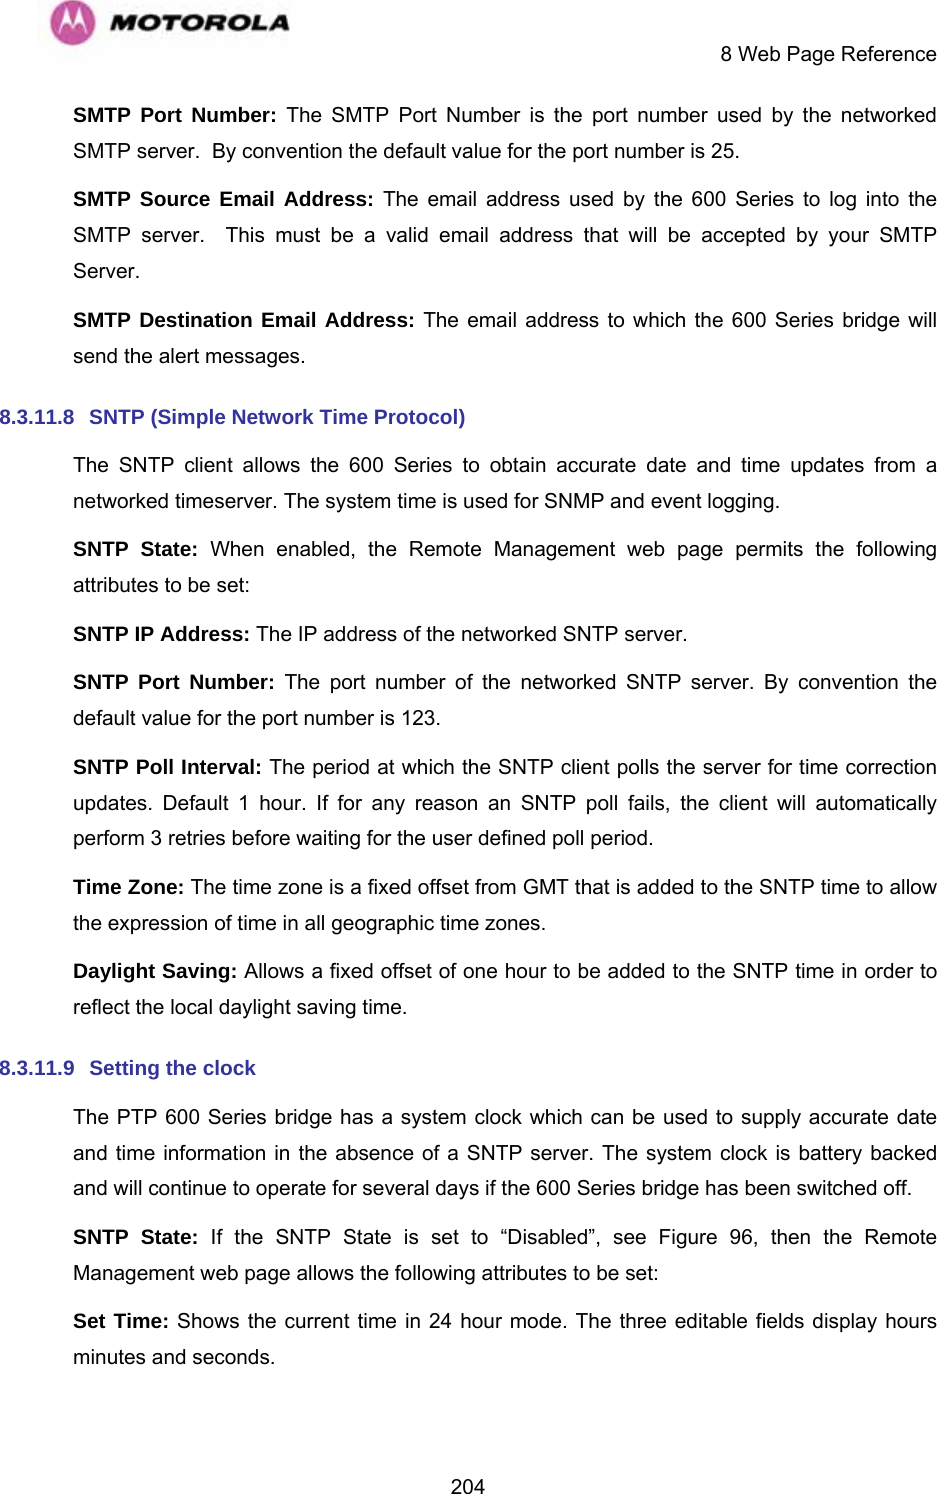     8 Web Page Reference  204SMTP Port Number: The SMTP Port Number is the port number used by the networked SMTP server.  By convention the default value for the port number is 25. SMTP Source Email Address: The email address used by the 600 Series to log into the SMTP server.  This must be a valid email address that will be accepted by your SMTP Server. SMTP Destination Email Address: The email address to which the 600 Series bridge will send the alert messages. 8.3.11.8  SNTP (Simple Network Time Protocol) The SNTP client allows the 600 Series to obtain accurate date and time updates from a networked timeserver. The system time is used for SNMP and event logging. SNTP State: When enabled, the Remote Management web page permits the following attributes to be set: SNTP IP Address: The IP address of the networked SNTP server. SNTP Port Number: The port number of the networked SNTP server. By convention the default value for the port number is 123. SNTP Poll Interval: The period at which the SNTP client polls the server for time correction updates. Default 1 hour. If for any reason an SNTP poll fails, the client will automatically perform 3 retries before waiting for the user defined poll period. Time Zone: The time zone is a fixed offset from GMT that is added to the SNTP time to allow the expression of time in all geographic time zones. Daylight Saving: Allows a fixed offset of one hour to be added to the SNTP time in order to reflect the local daylight saving time. 8.3.11.9  Setting the clock  The PTP 600 Series bridge has a system clock which can be used to supply accurate date and time information in the absence of a SNTP server. The system clock is battery backed and will continue to operate for several days if the 600 Series bridge has been switched off. SNTP State: If the SNTP State is set to “Disabled”, see Figure 96, then the Remote Management web page allows the following attributes to be set: Set Time: Shows the current time in 24 hour mode. The three editable fields display hours minutes and seconds. 